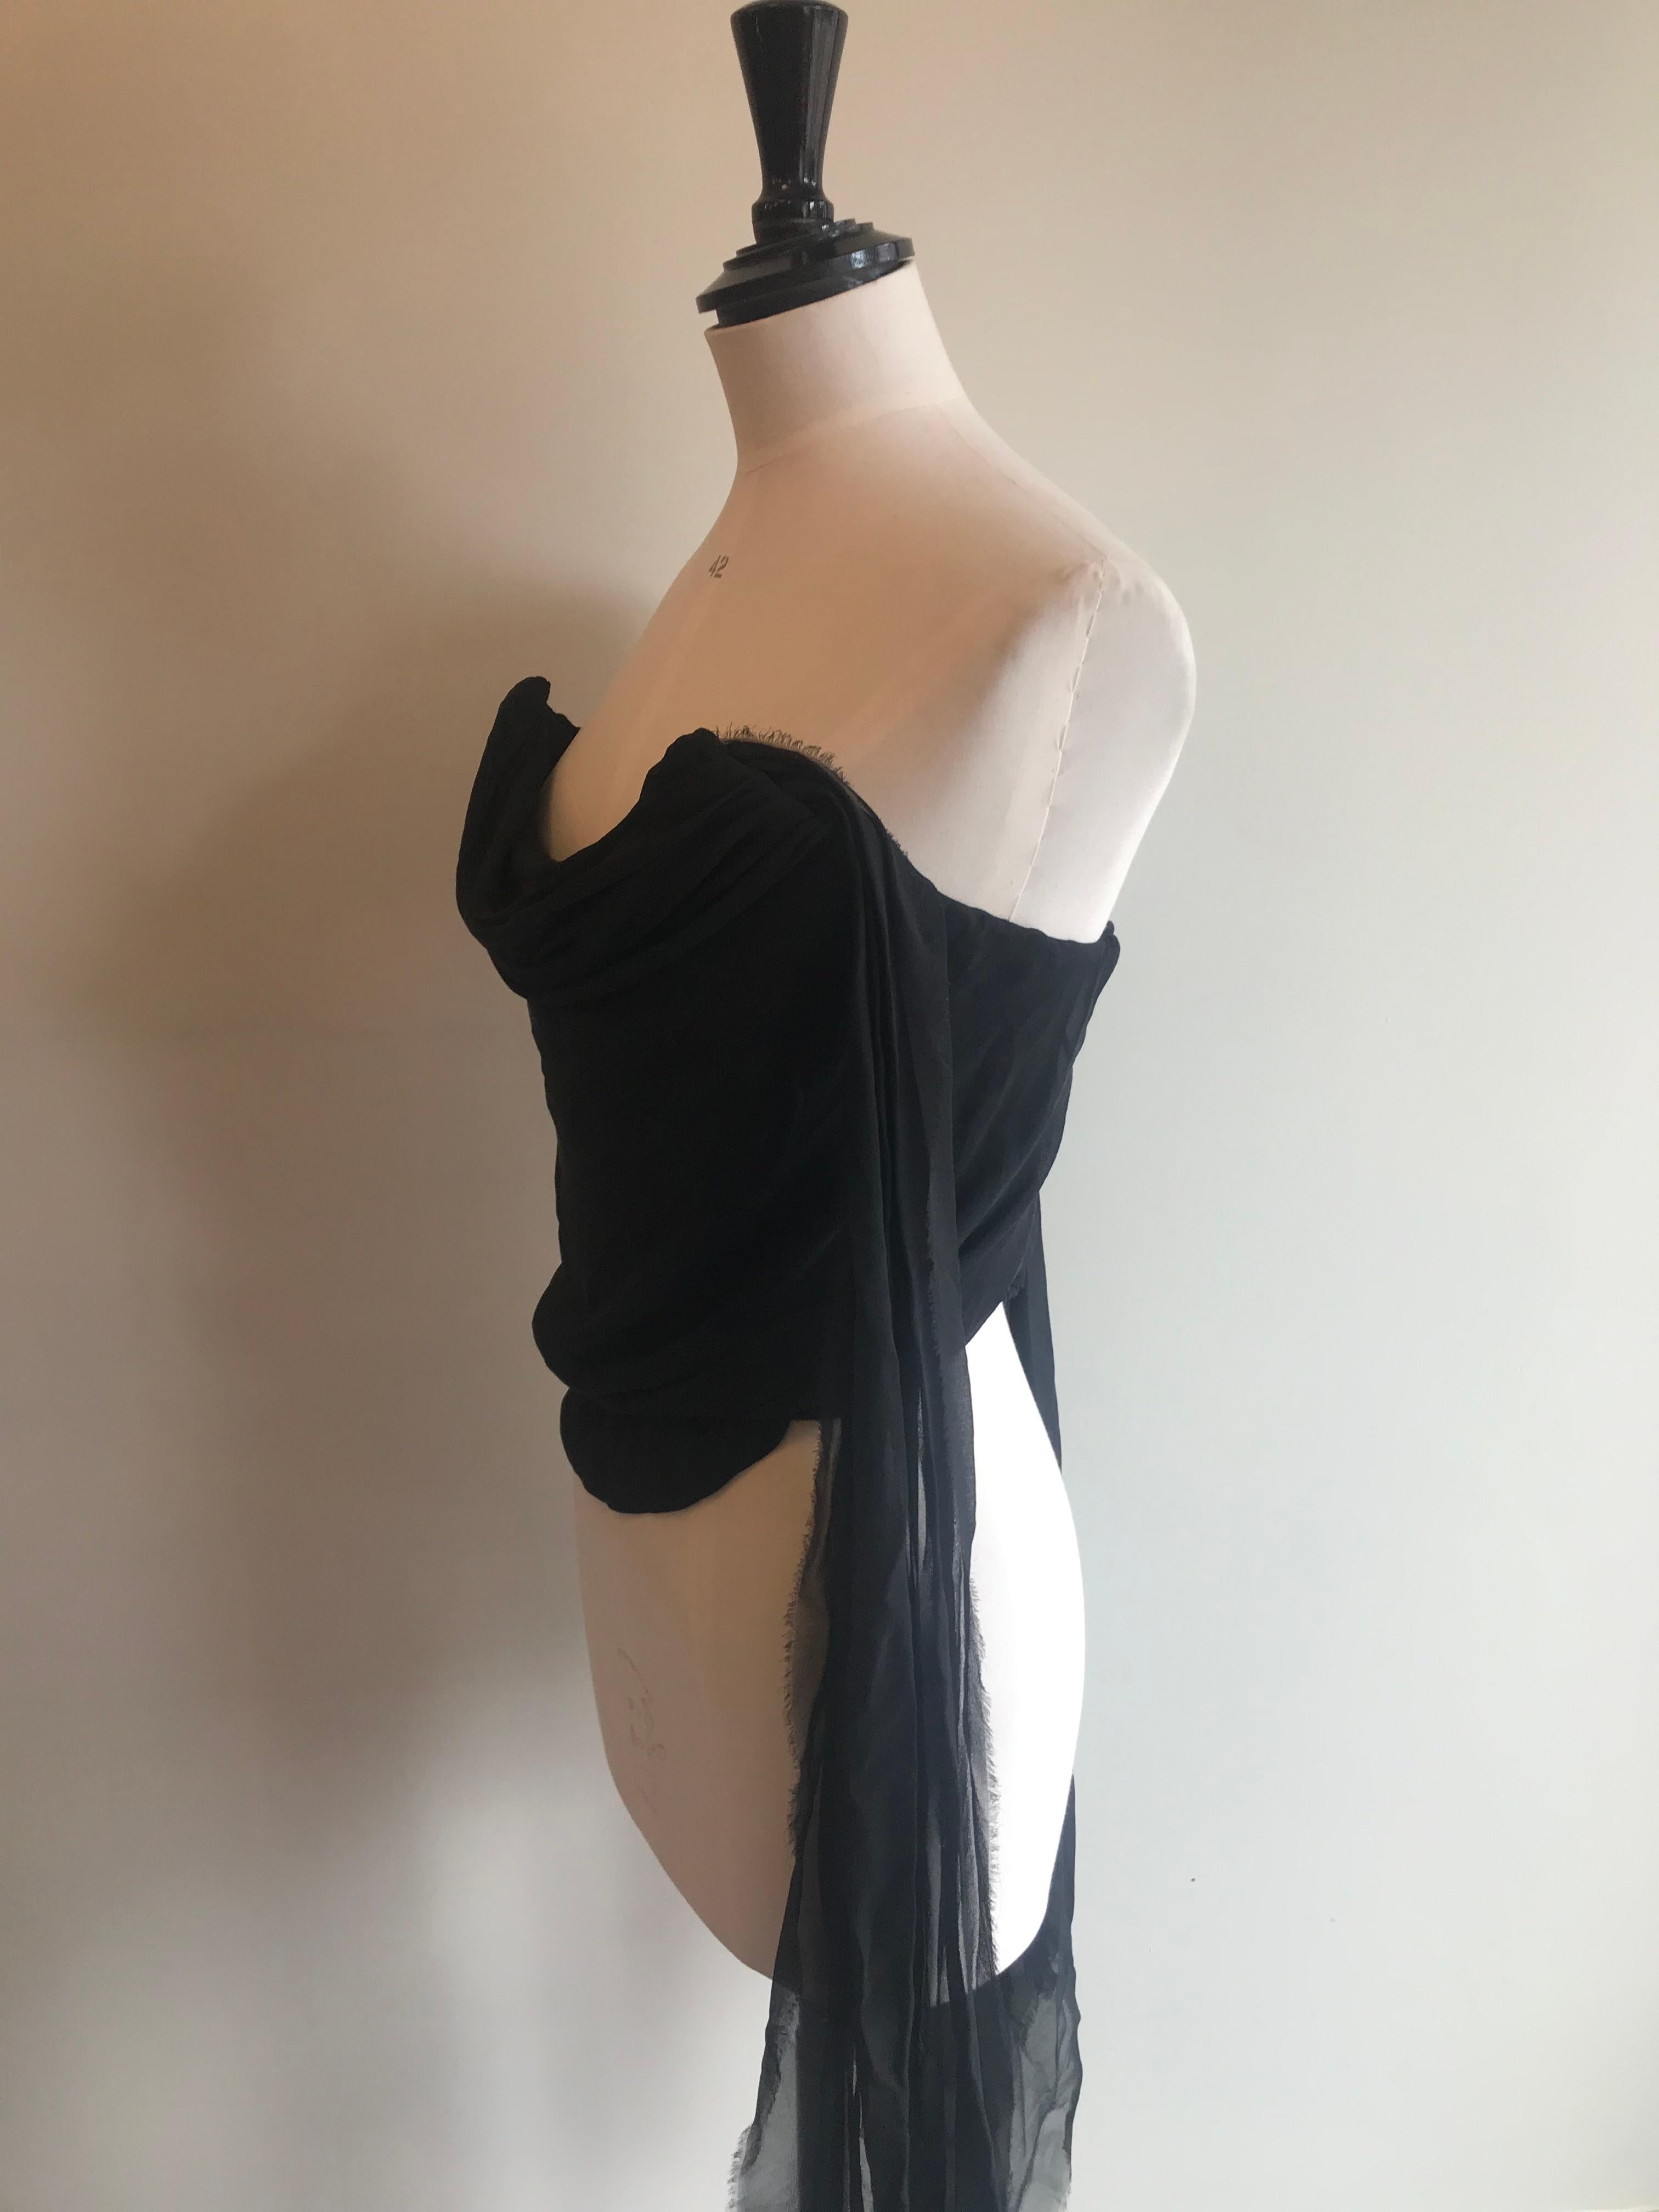 Black silk and chiffon bustier with built in corset with draped chiffon neckline and overlay. Flowing sashes of chiffon hang off the front and back sides which can flow loose or be tied up together. Circa late 1990s. Made in Italy. Marked size 16